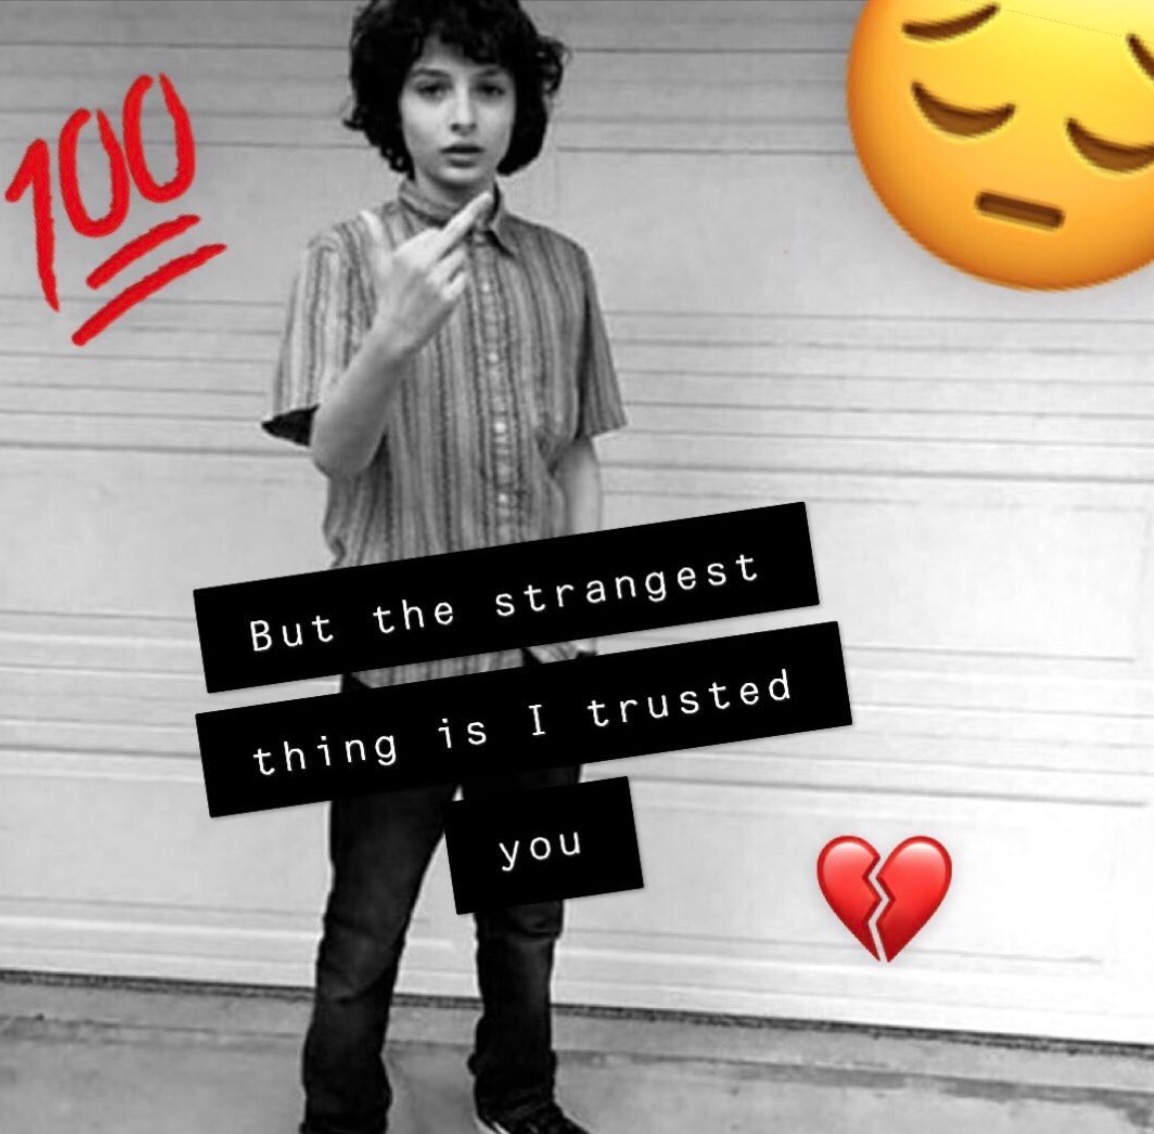 finn wolfhard middle finger - But the strangest thing is I trusted you